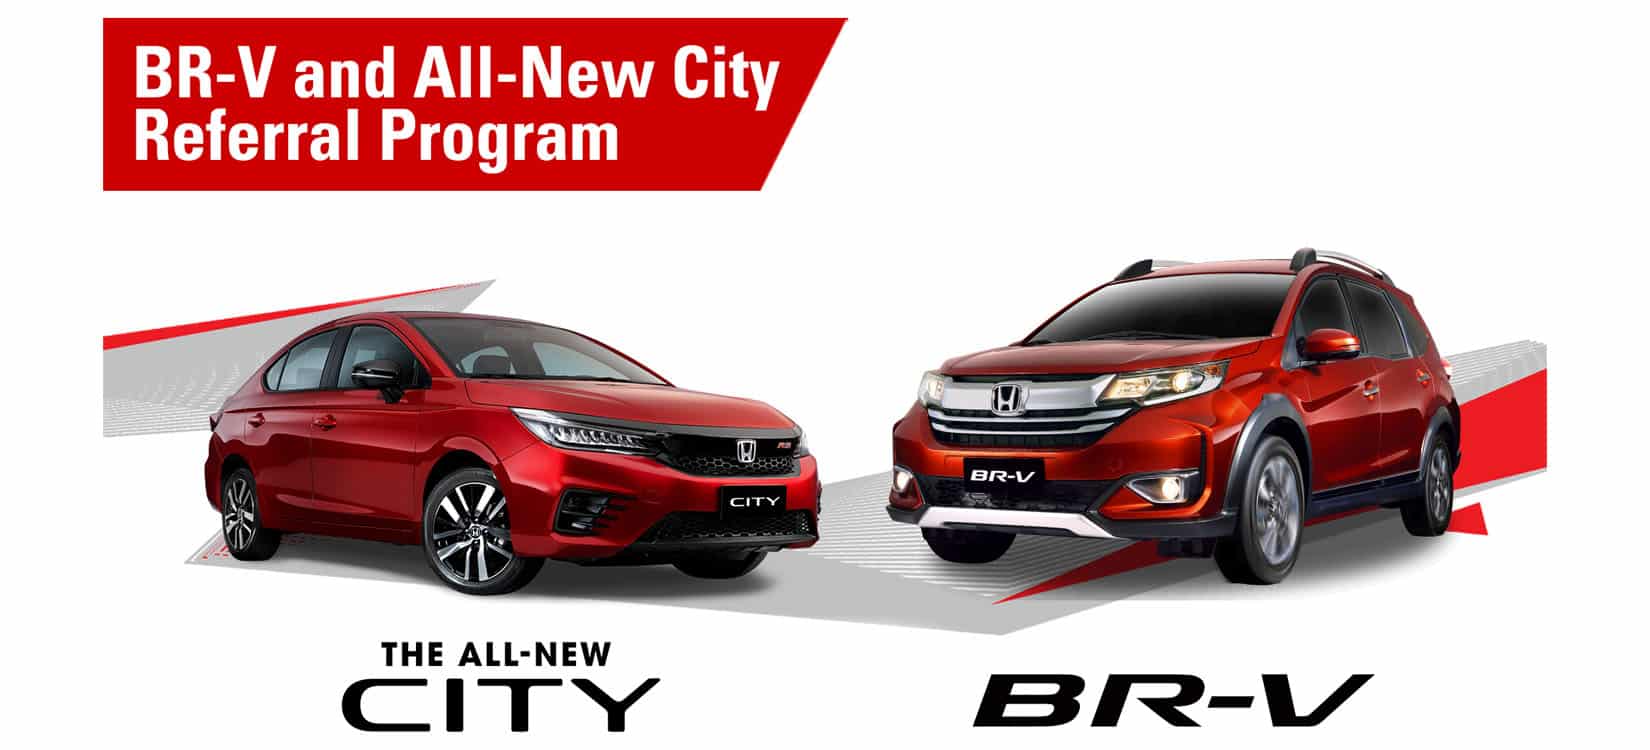 Honda gives customers a P5000 treat through BR-V and All-New City referral program